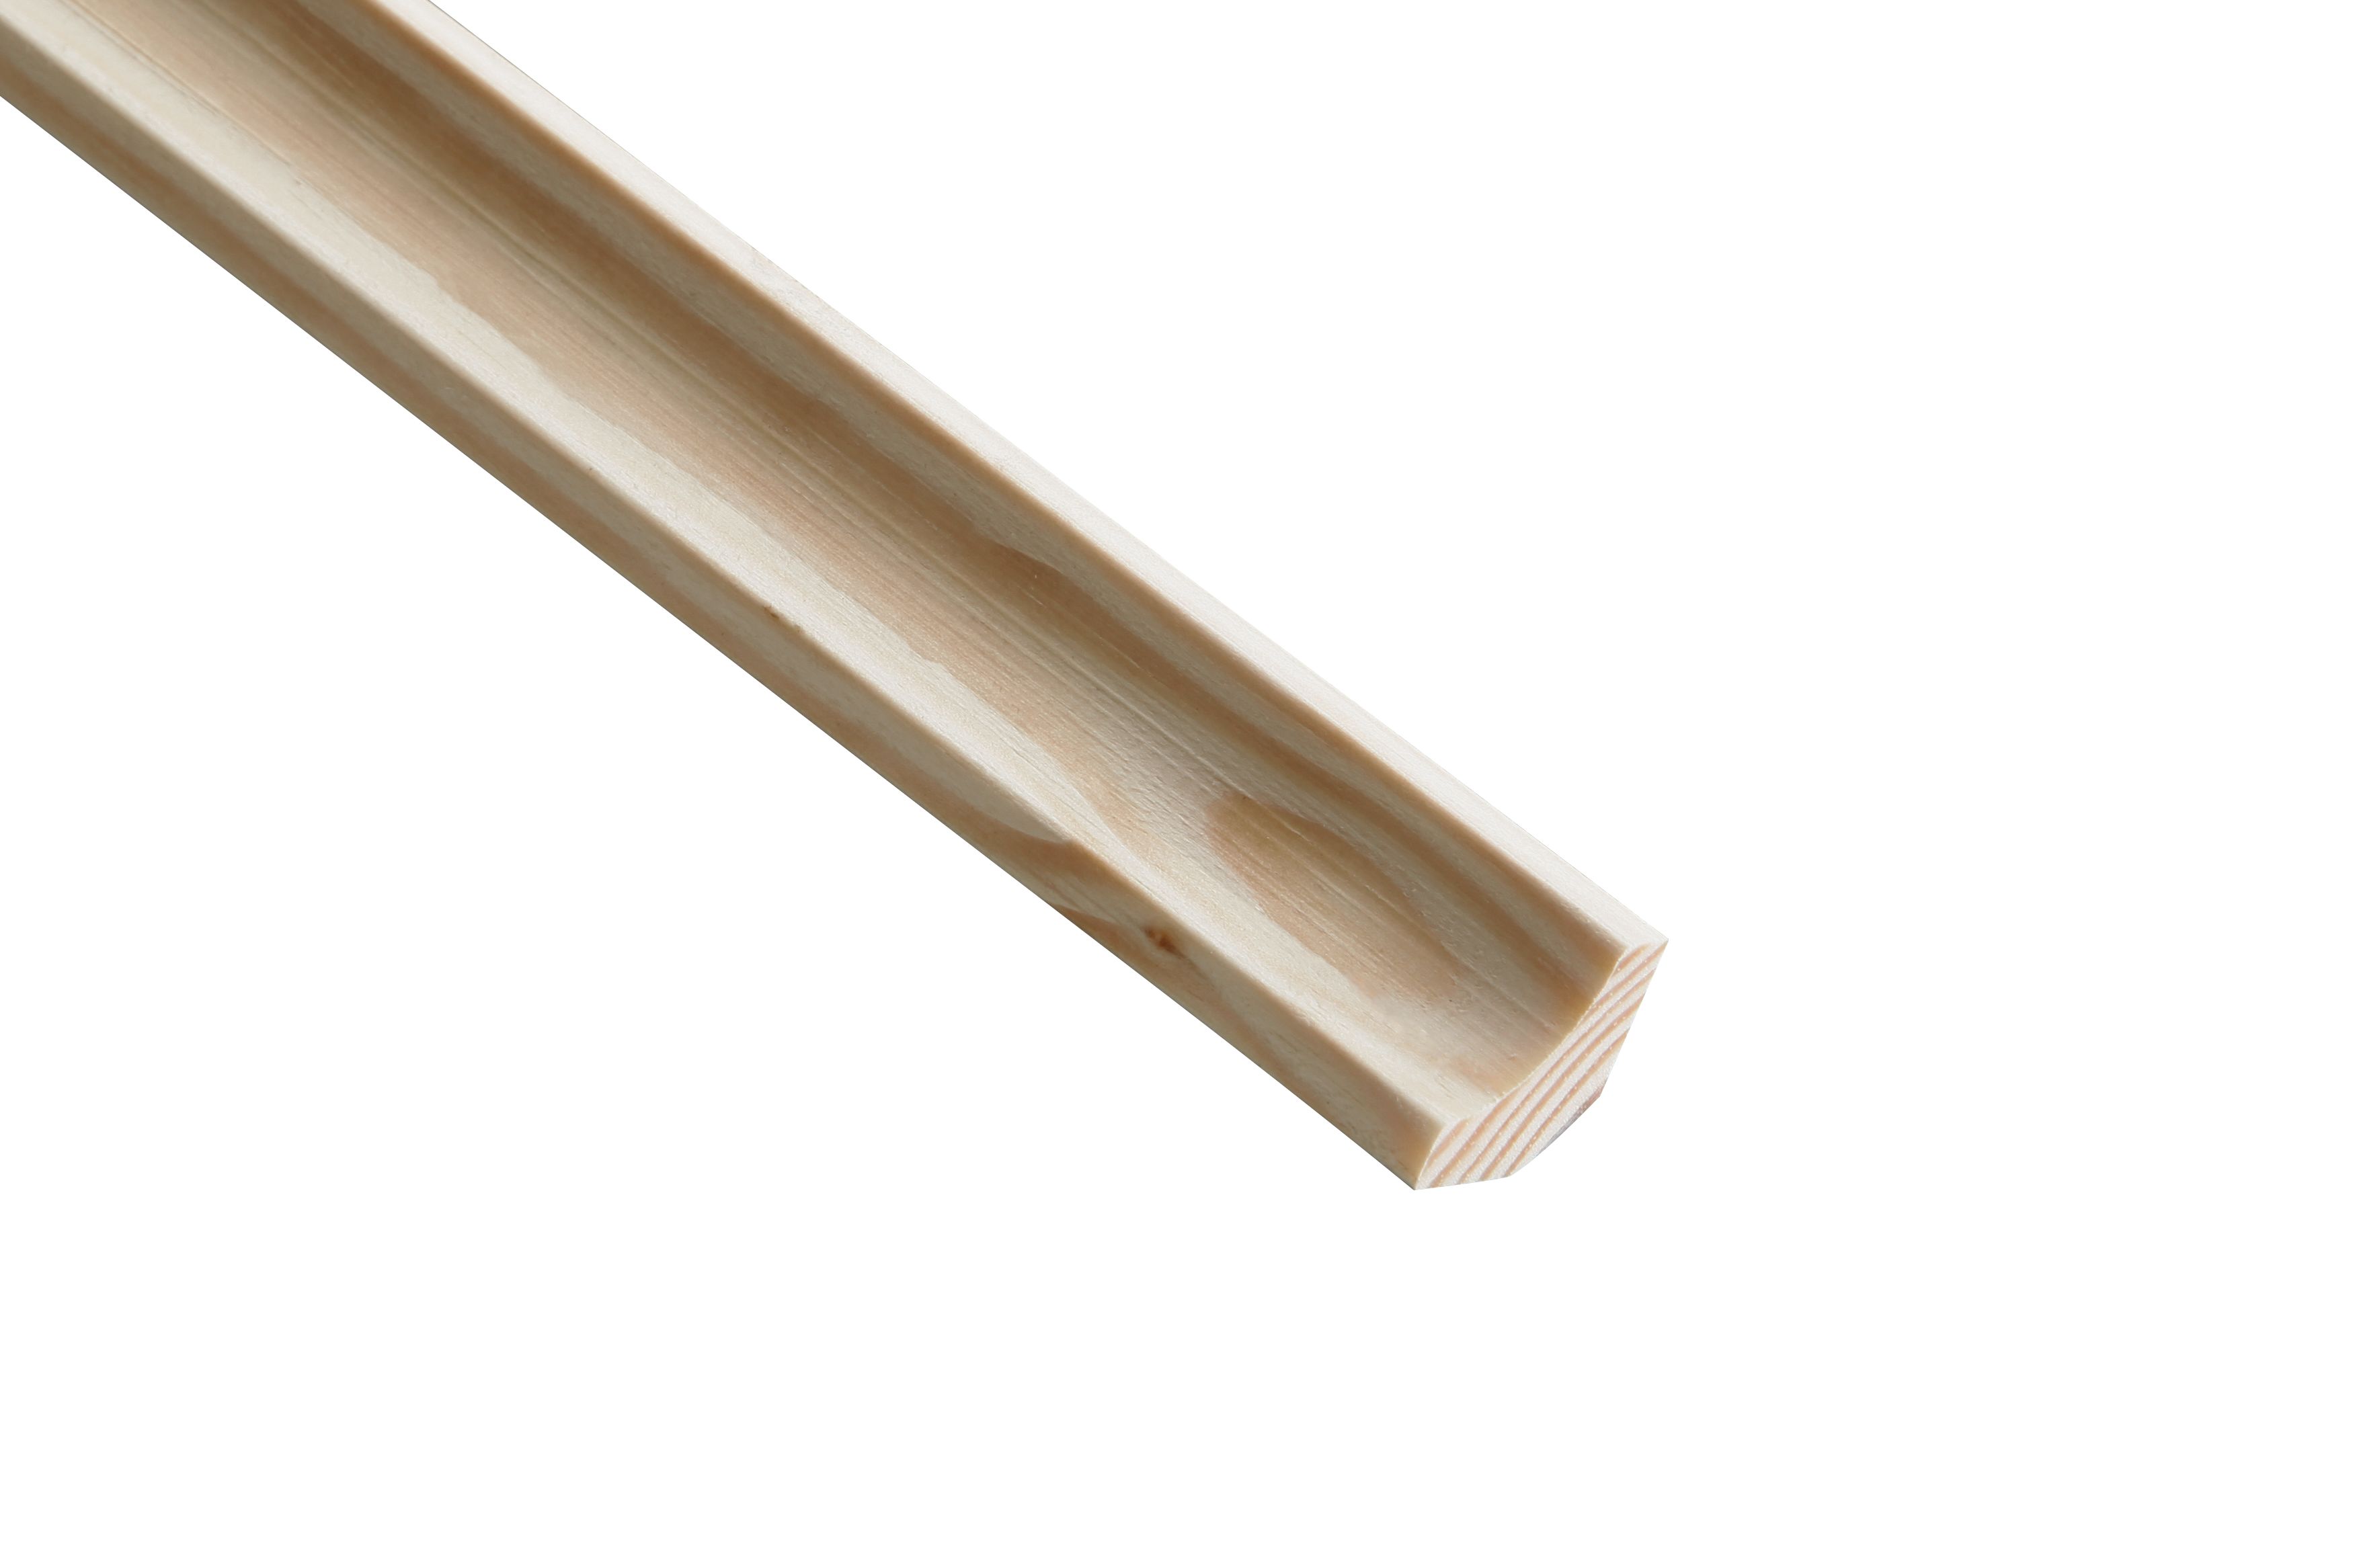 Image of Wickes Pine Scotia Moulding - 18 x 18 x 2400mm